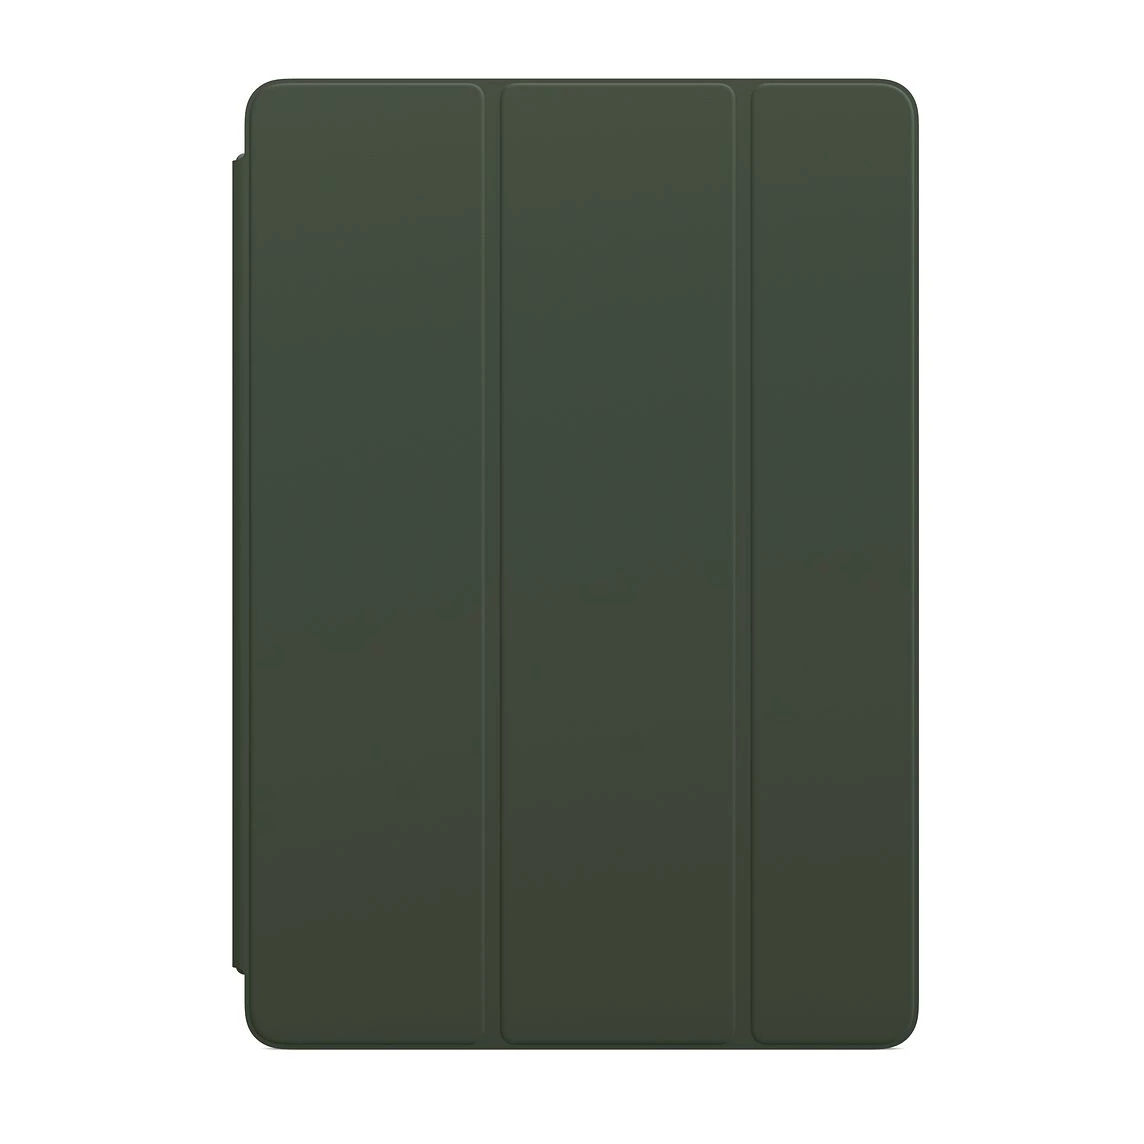 Apple Smart Cover for iPad 10.2" / Air 3 / Pro 10.5" - Cyprus Green (MGYR3)